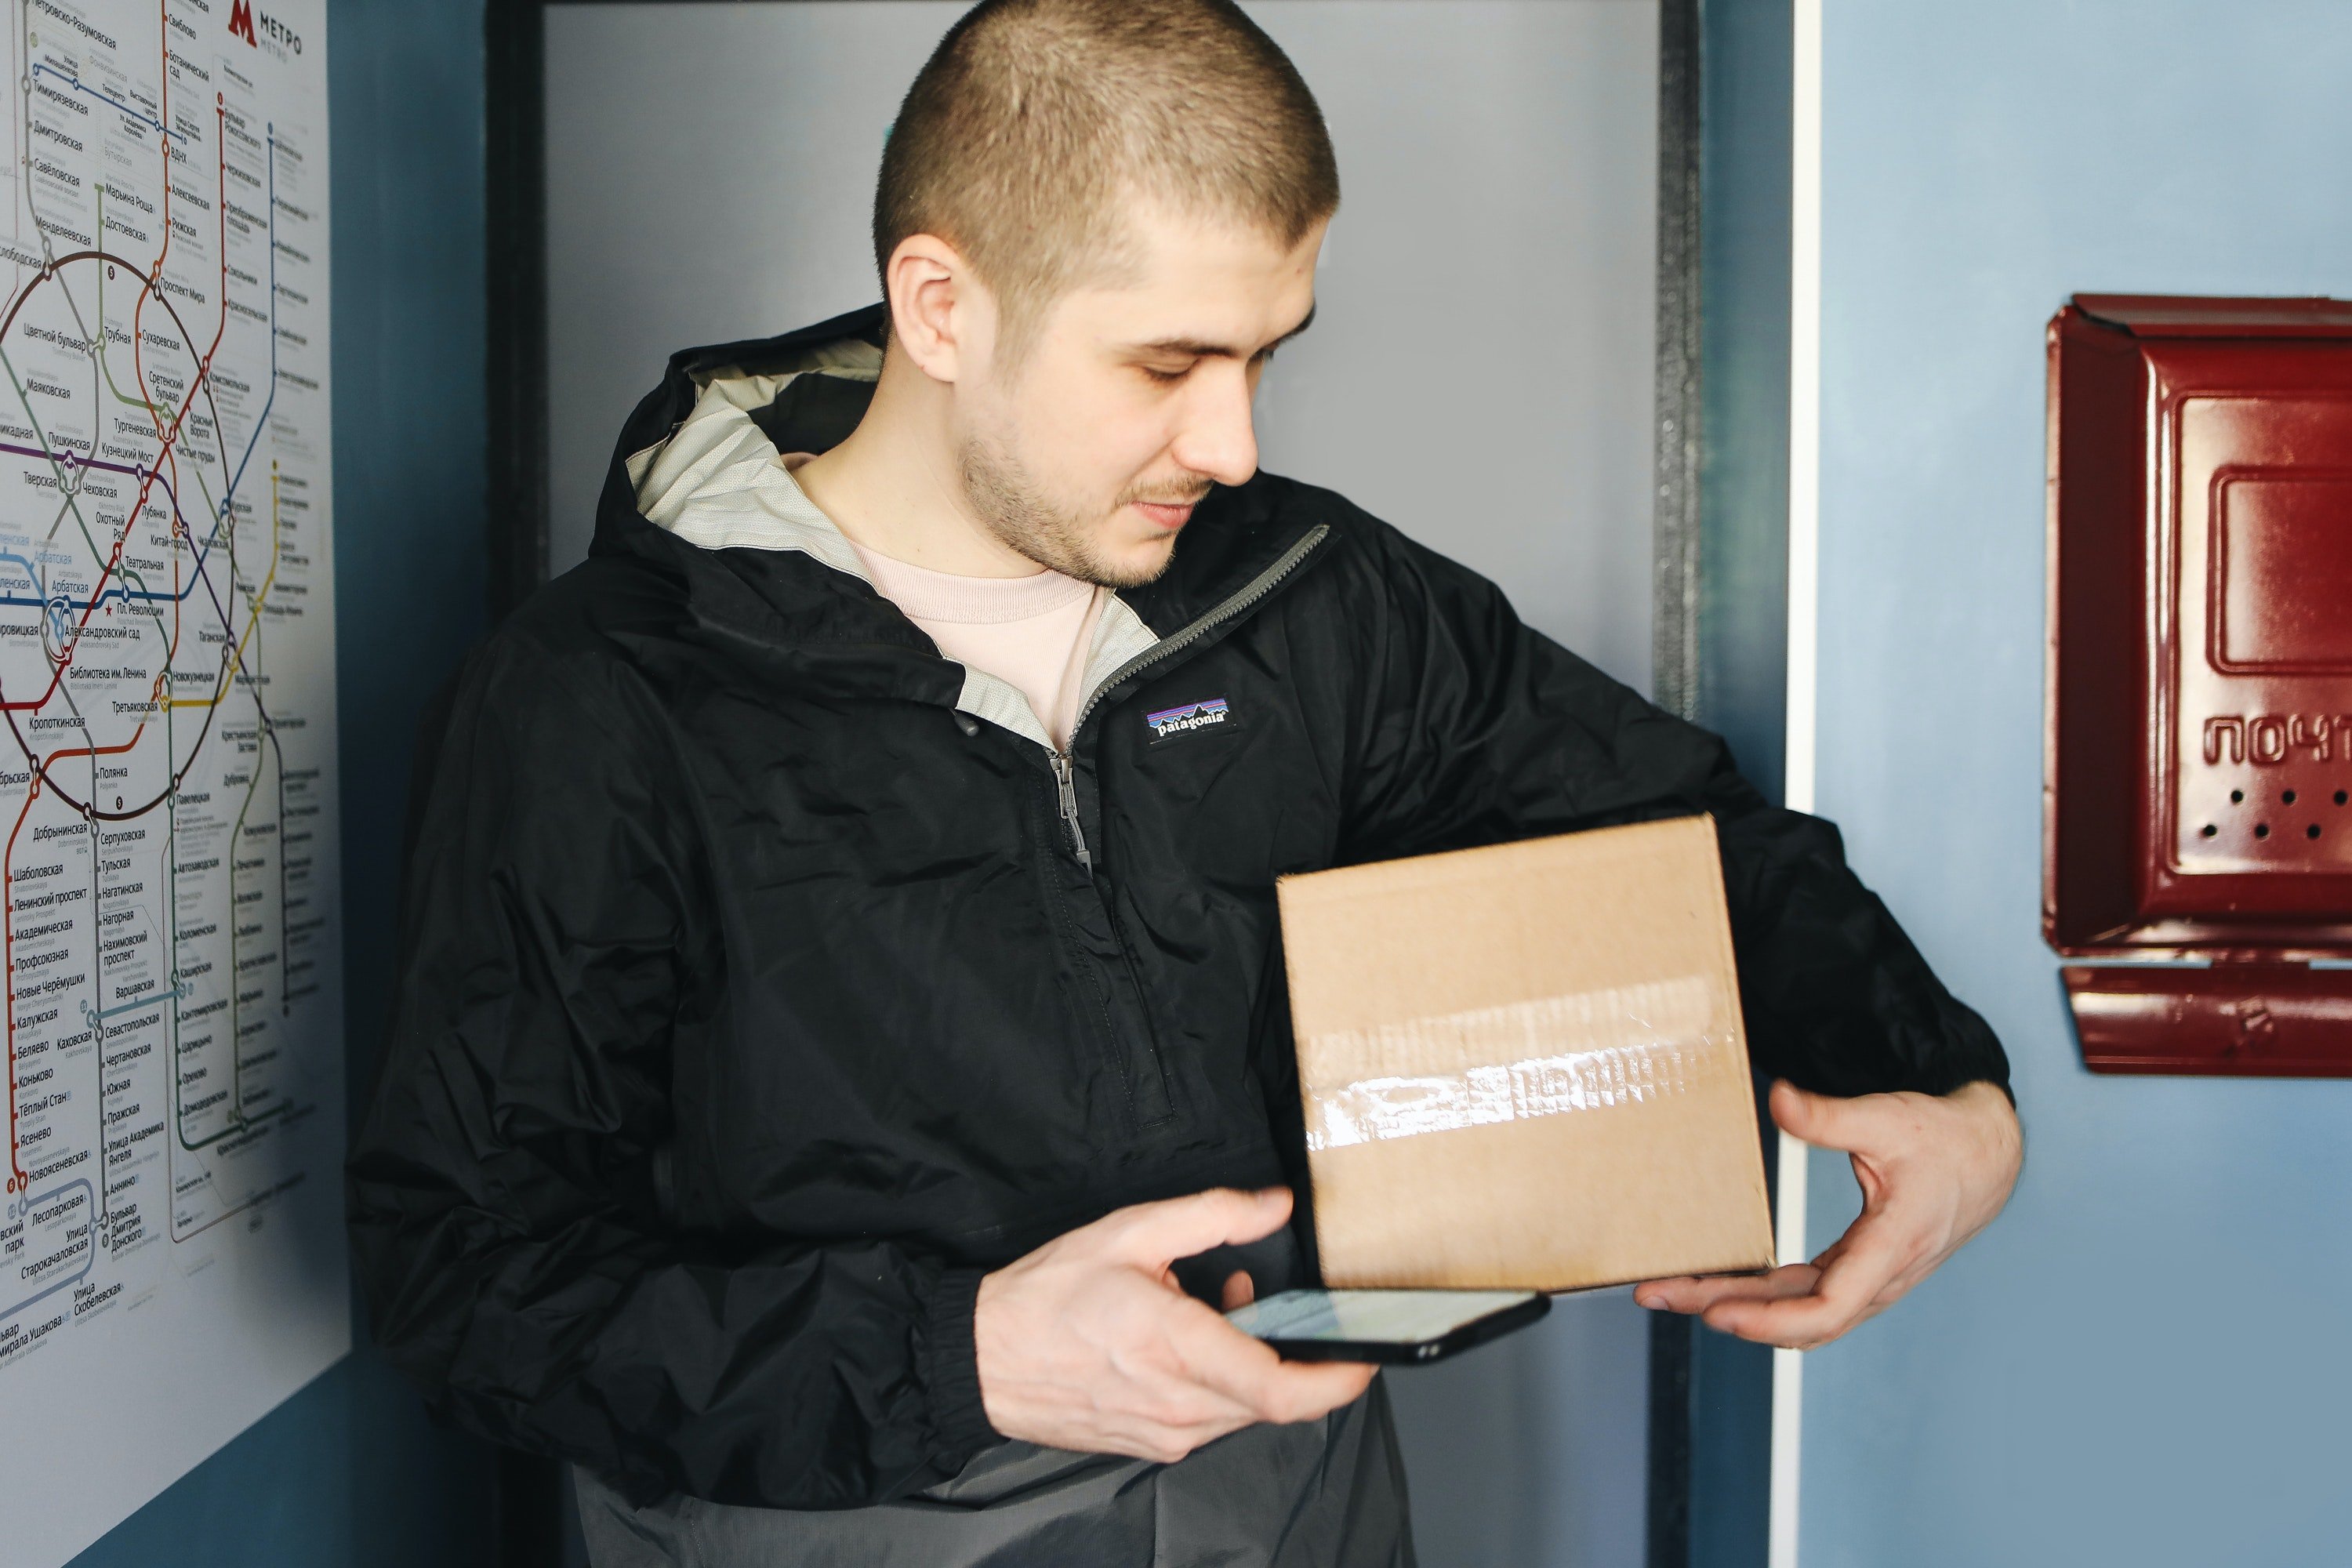 Aaron was happy after completing his first delivery | Photo: Pexels